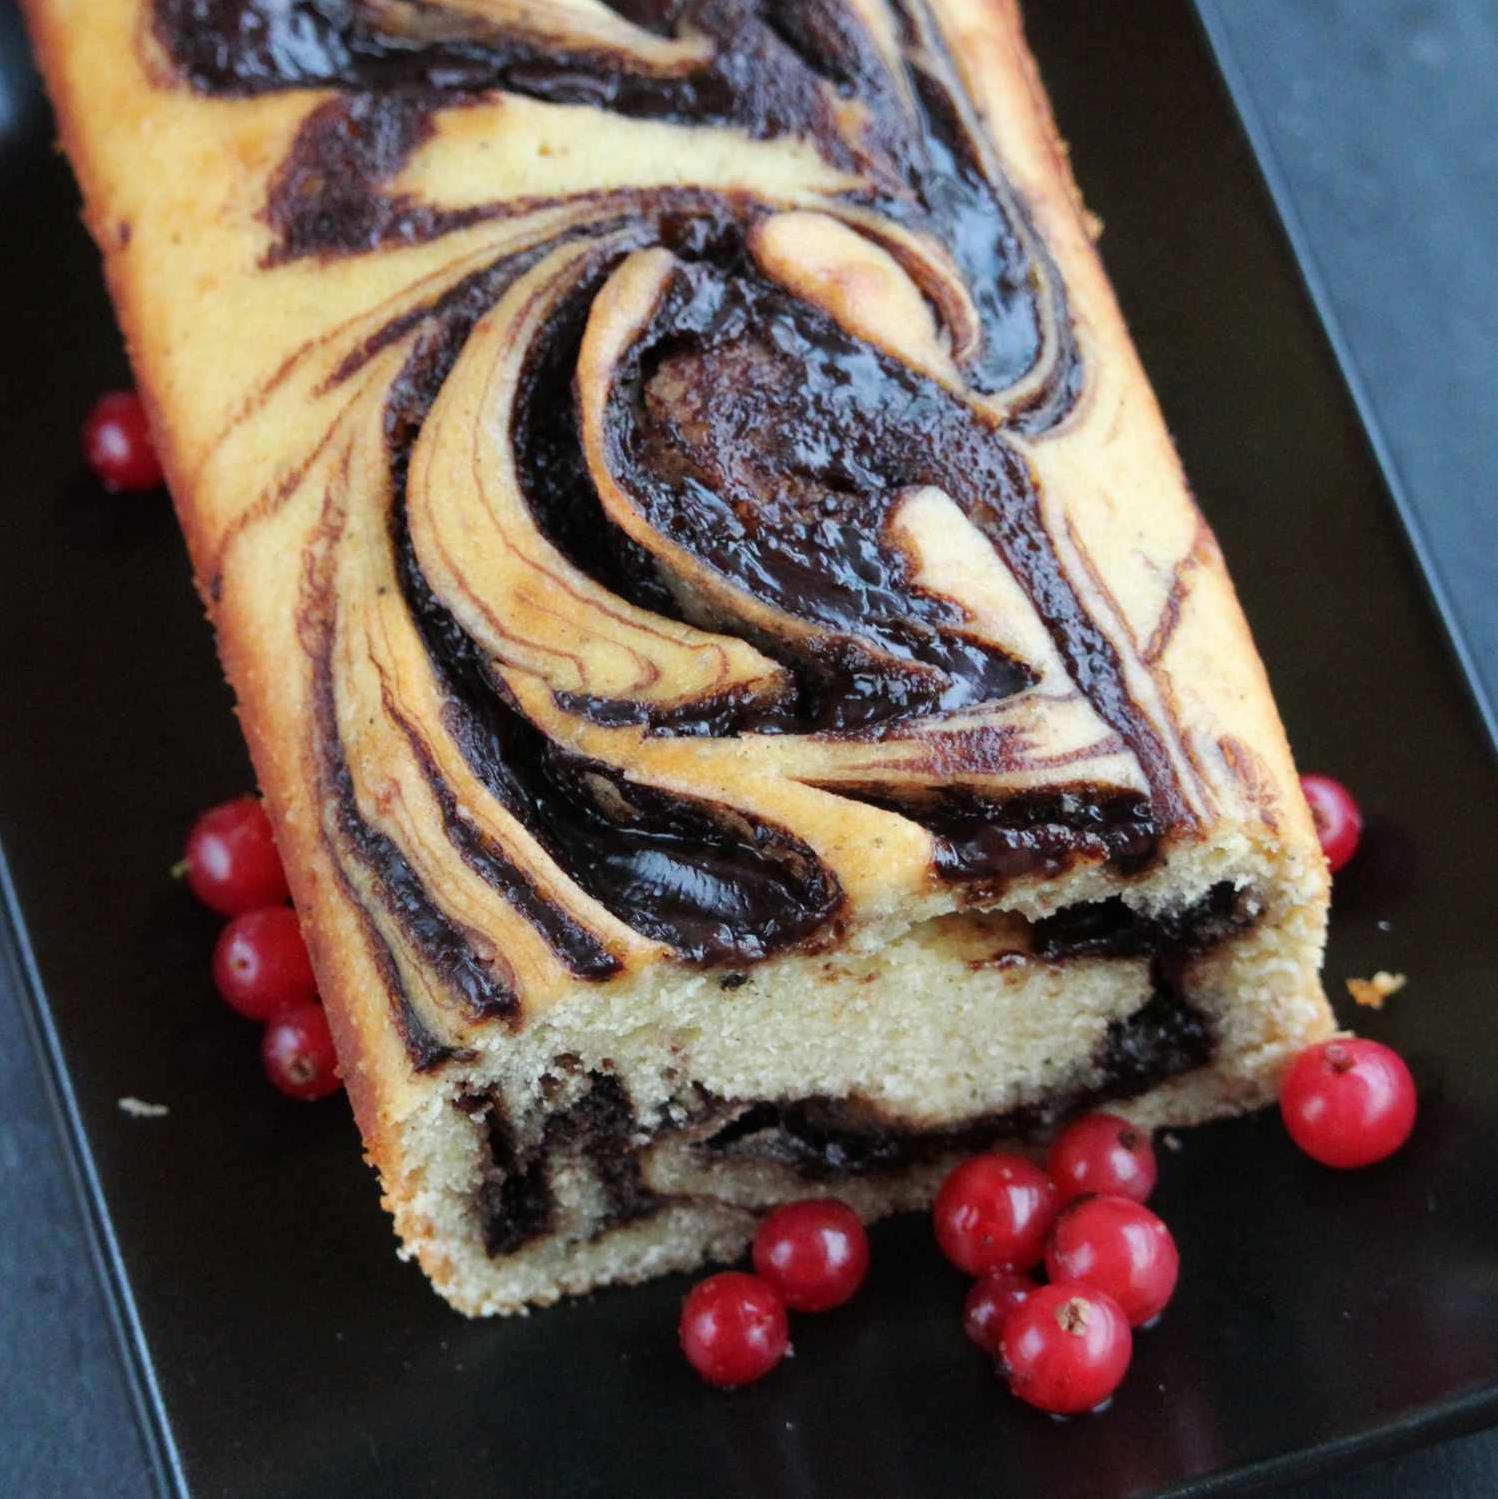  Satisfy your sweet cravings with this delightful pound cake